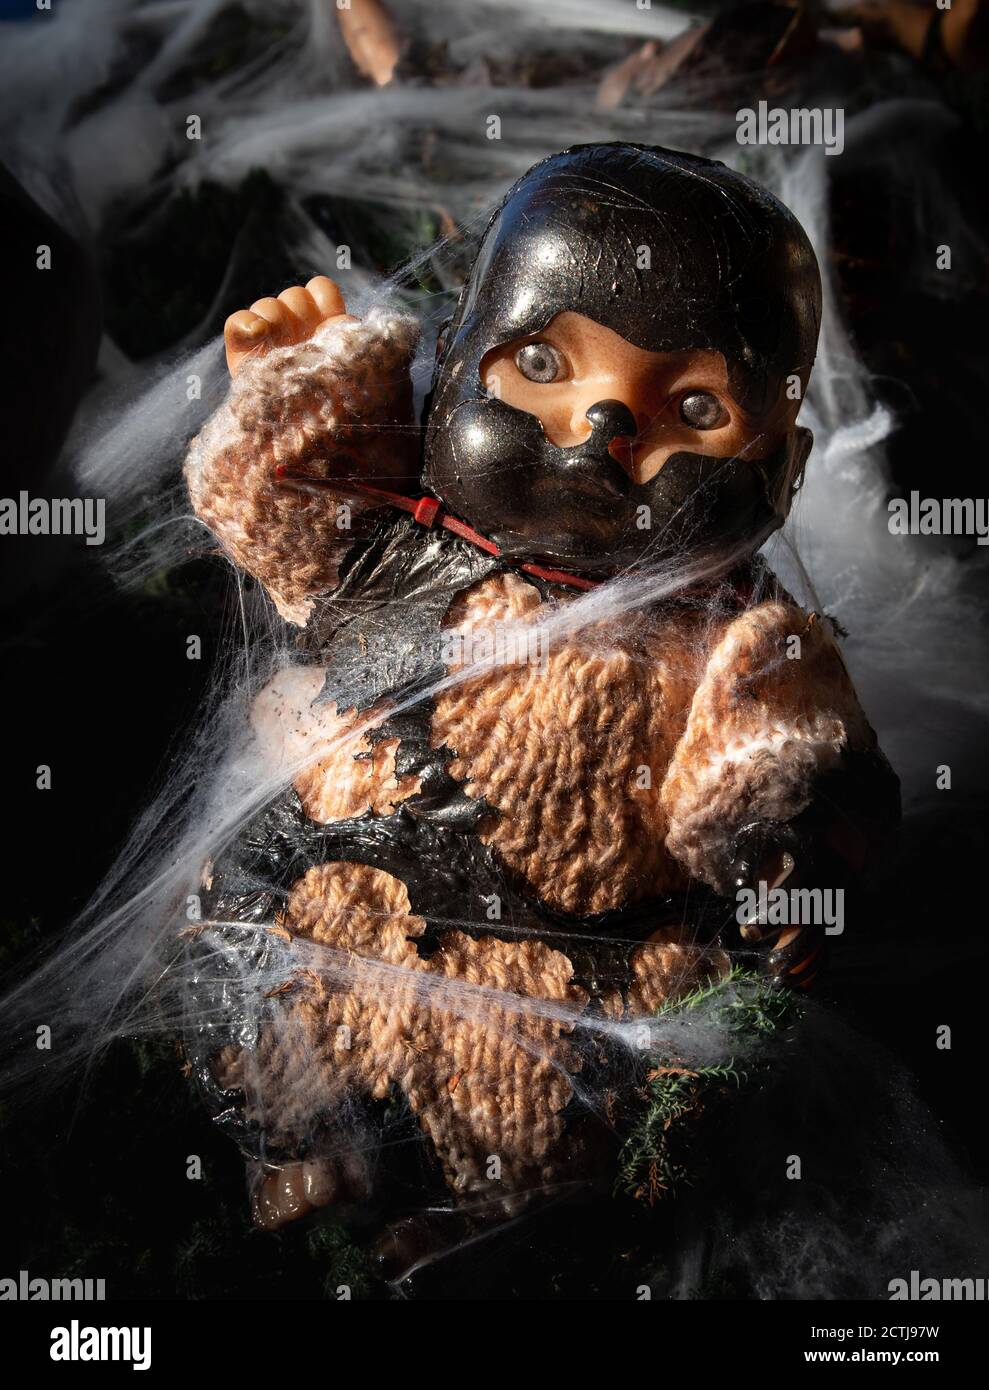 Creepy doll. Halloween decoration. The baby doll is caught in spider webs and is wearing a dark mask. Horror concept. Stock Photo